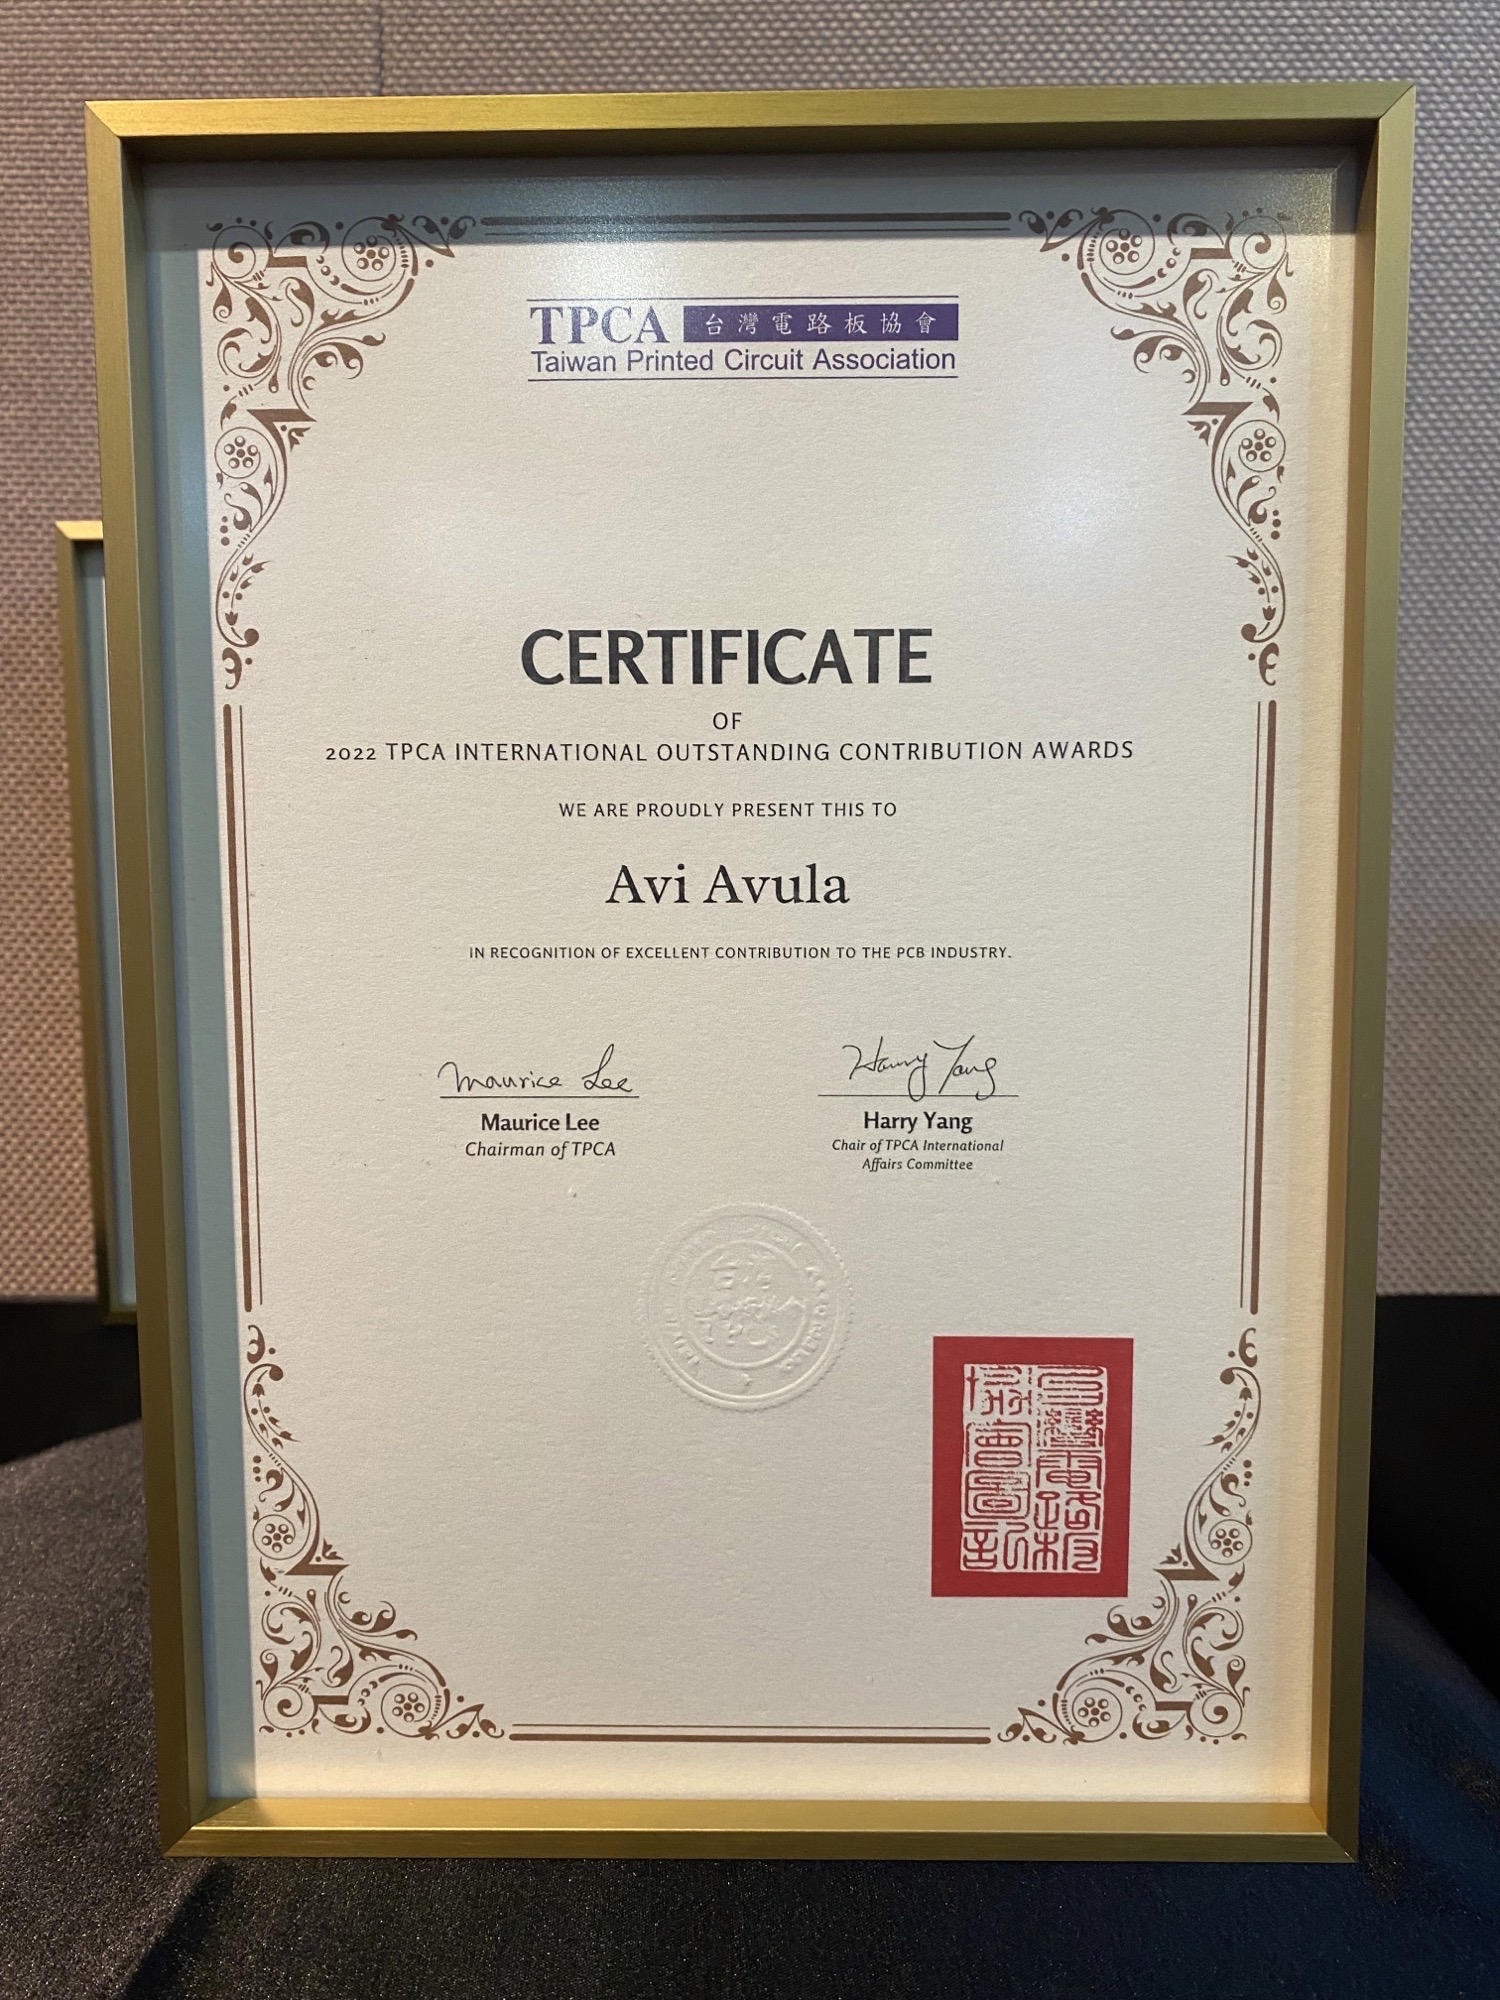 Avula received the first TPCA International Outstanding Contribution Award